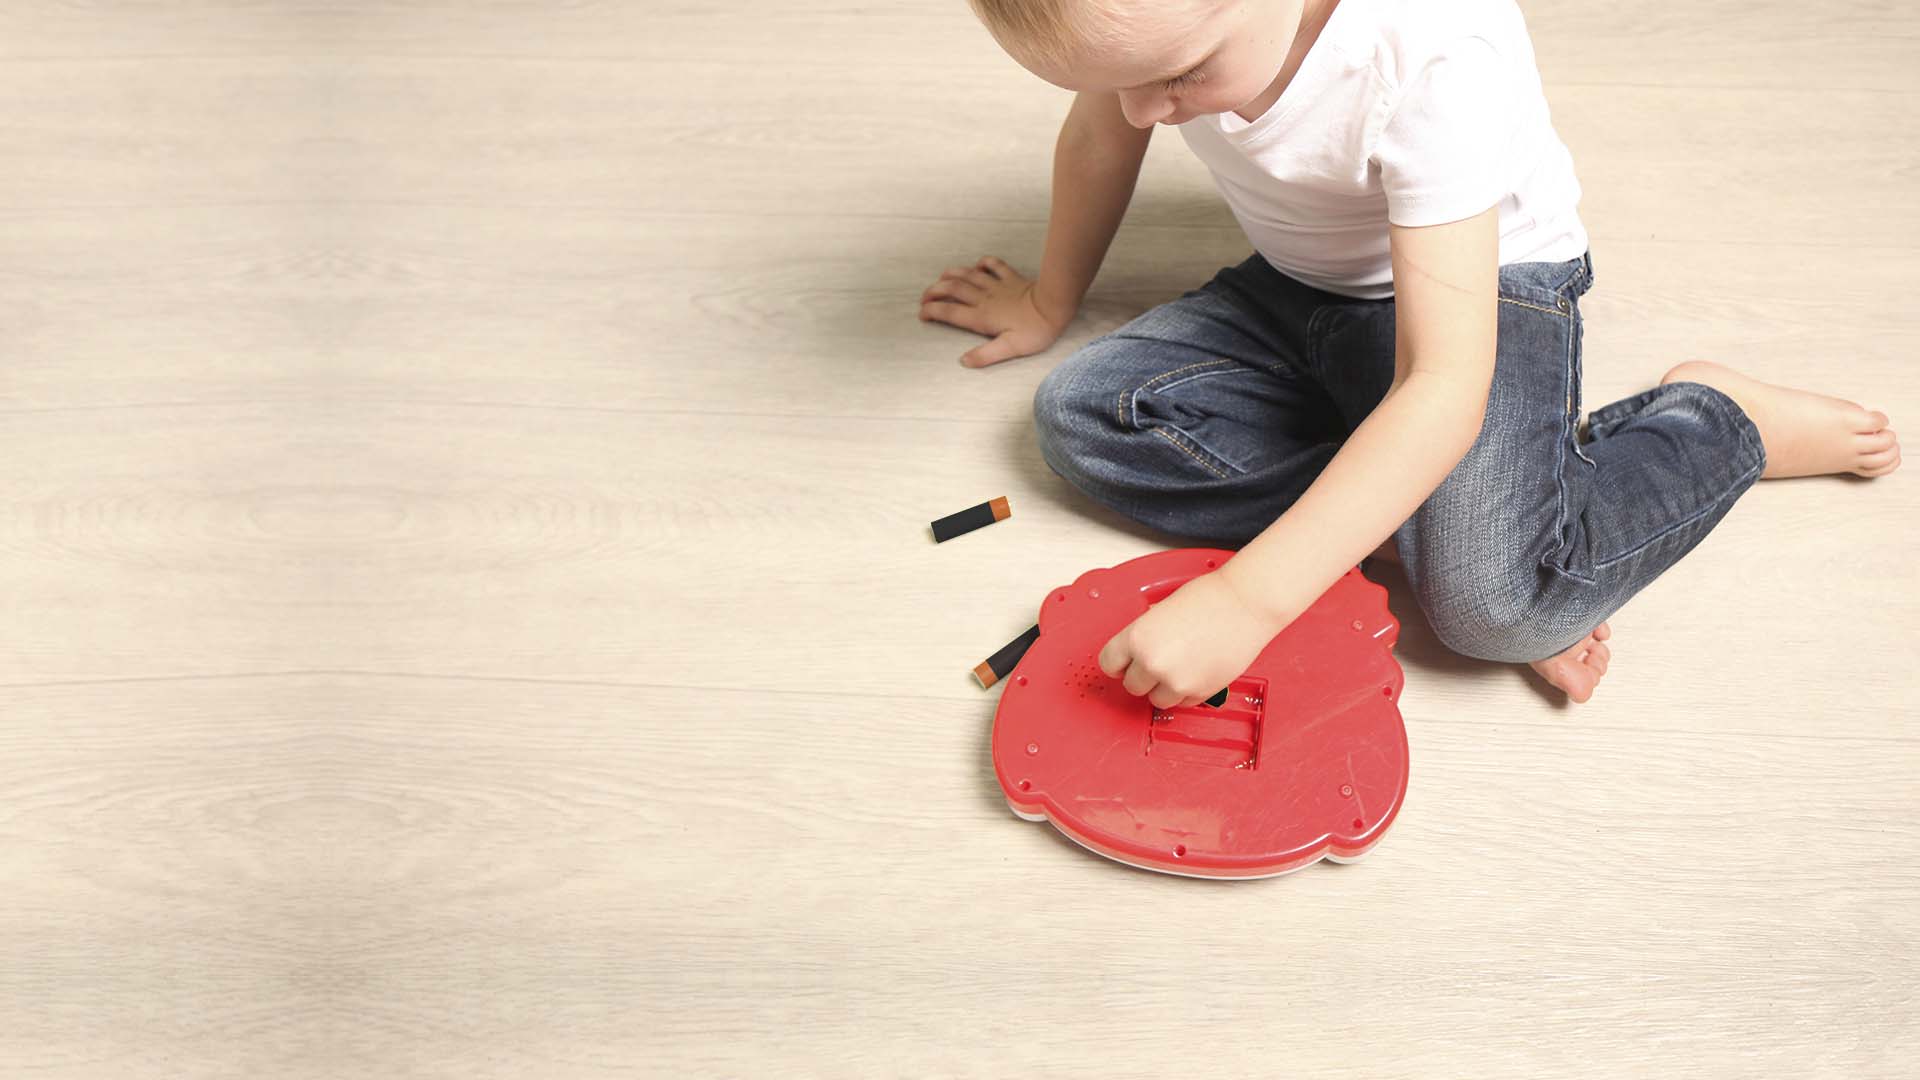 Child playing with a potentially dangerous and defective toy with access to batteries